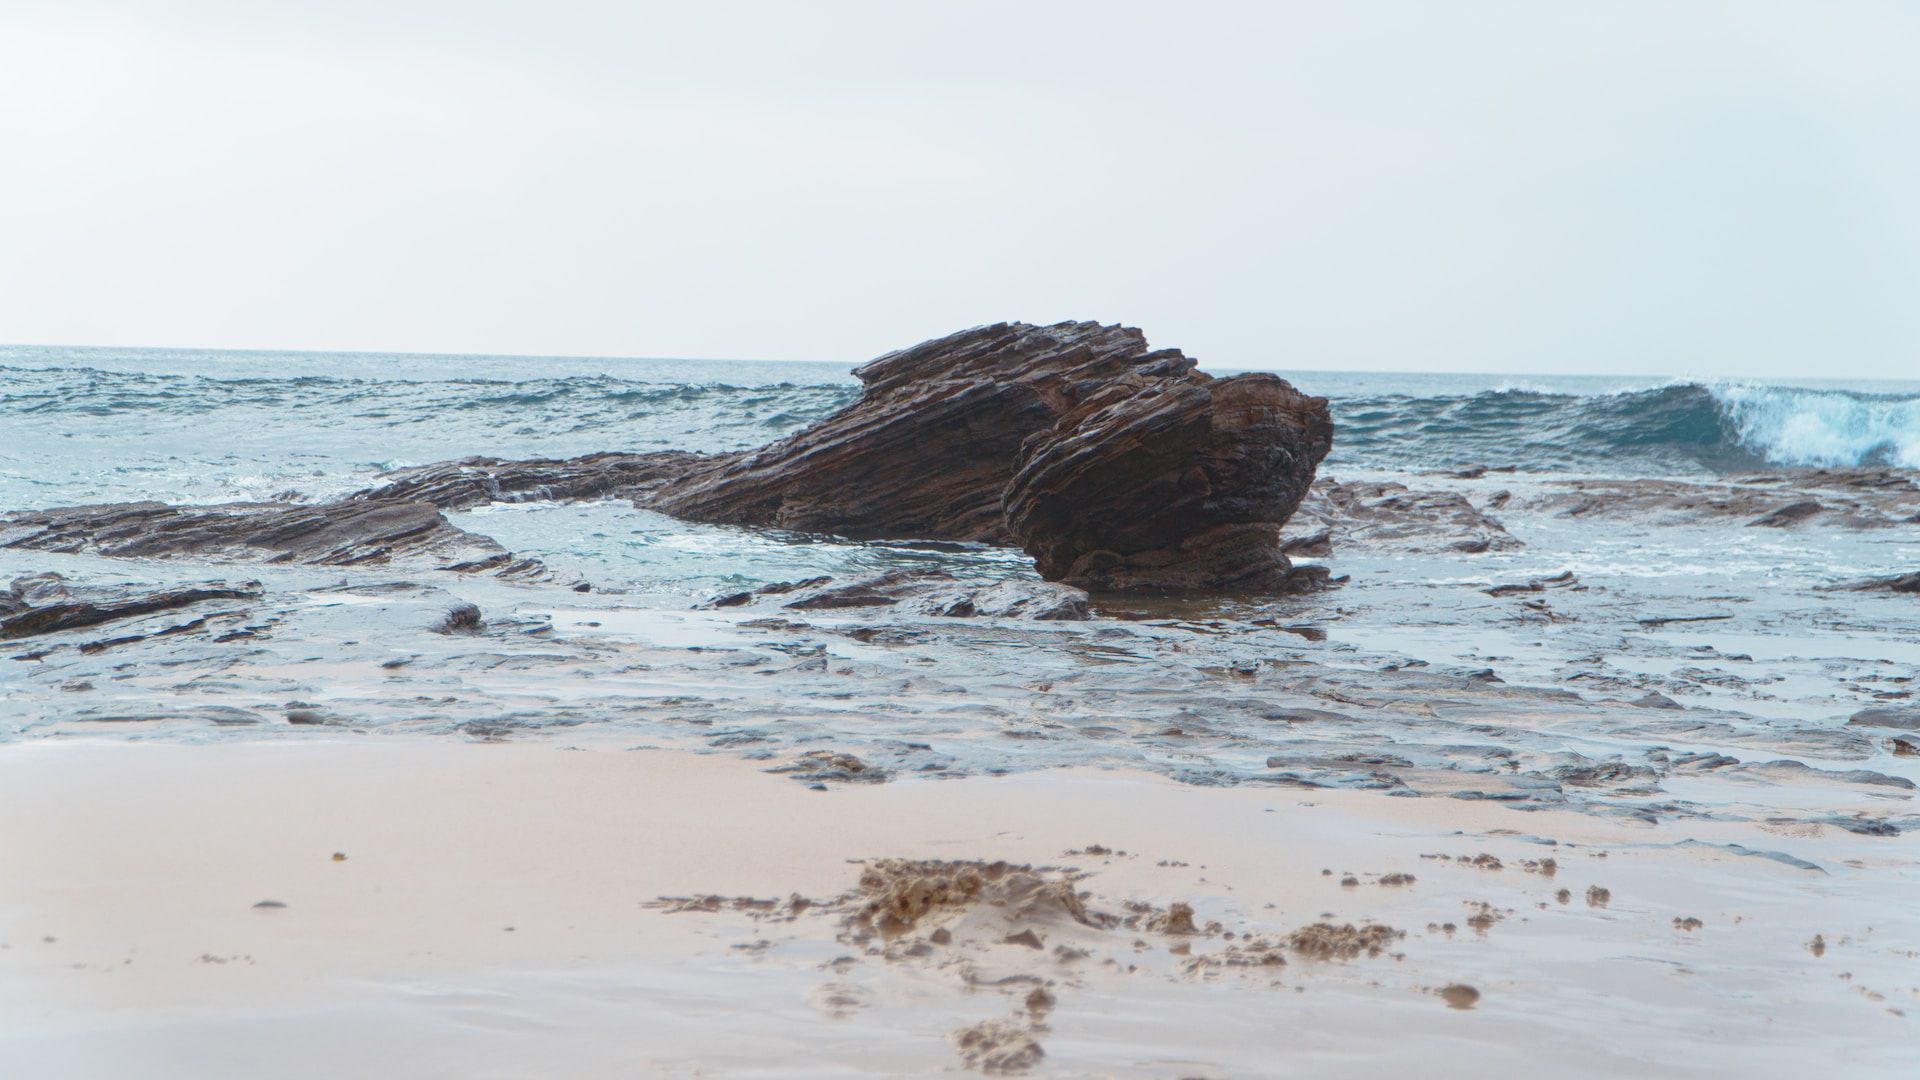 Rock formations in the shore of a wavey beach